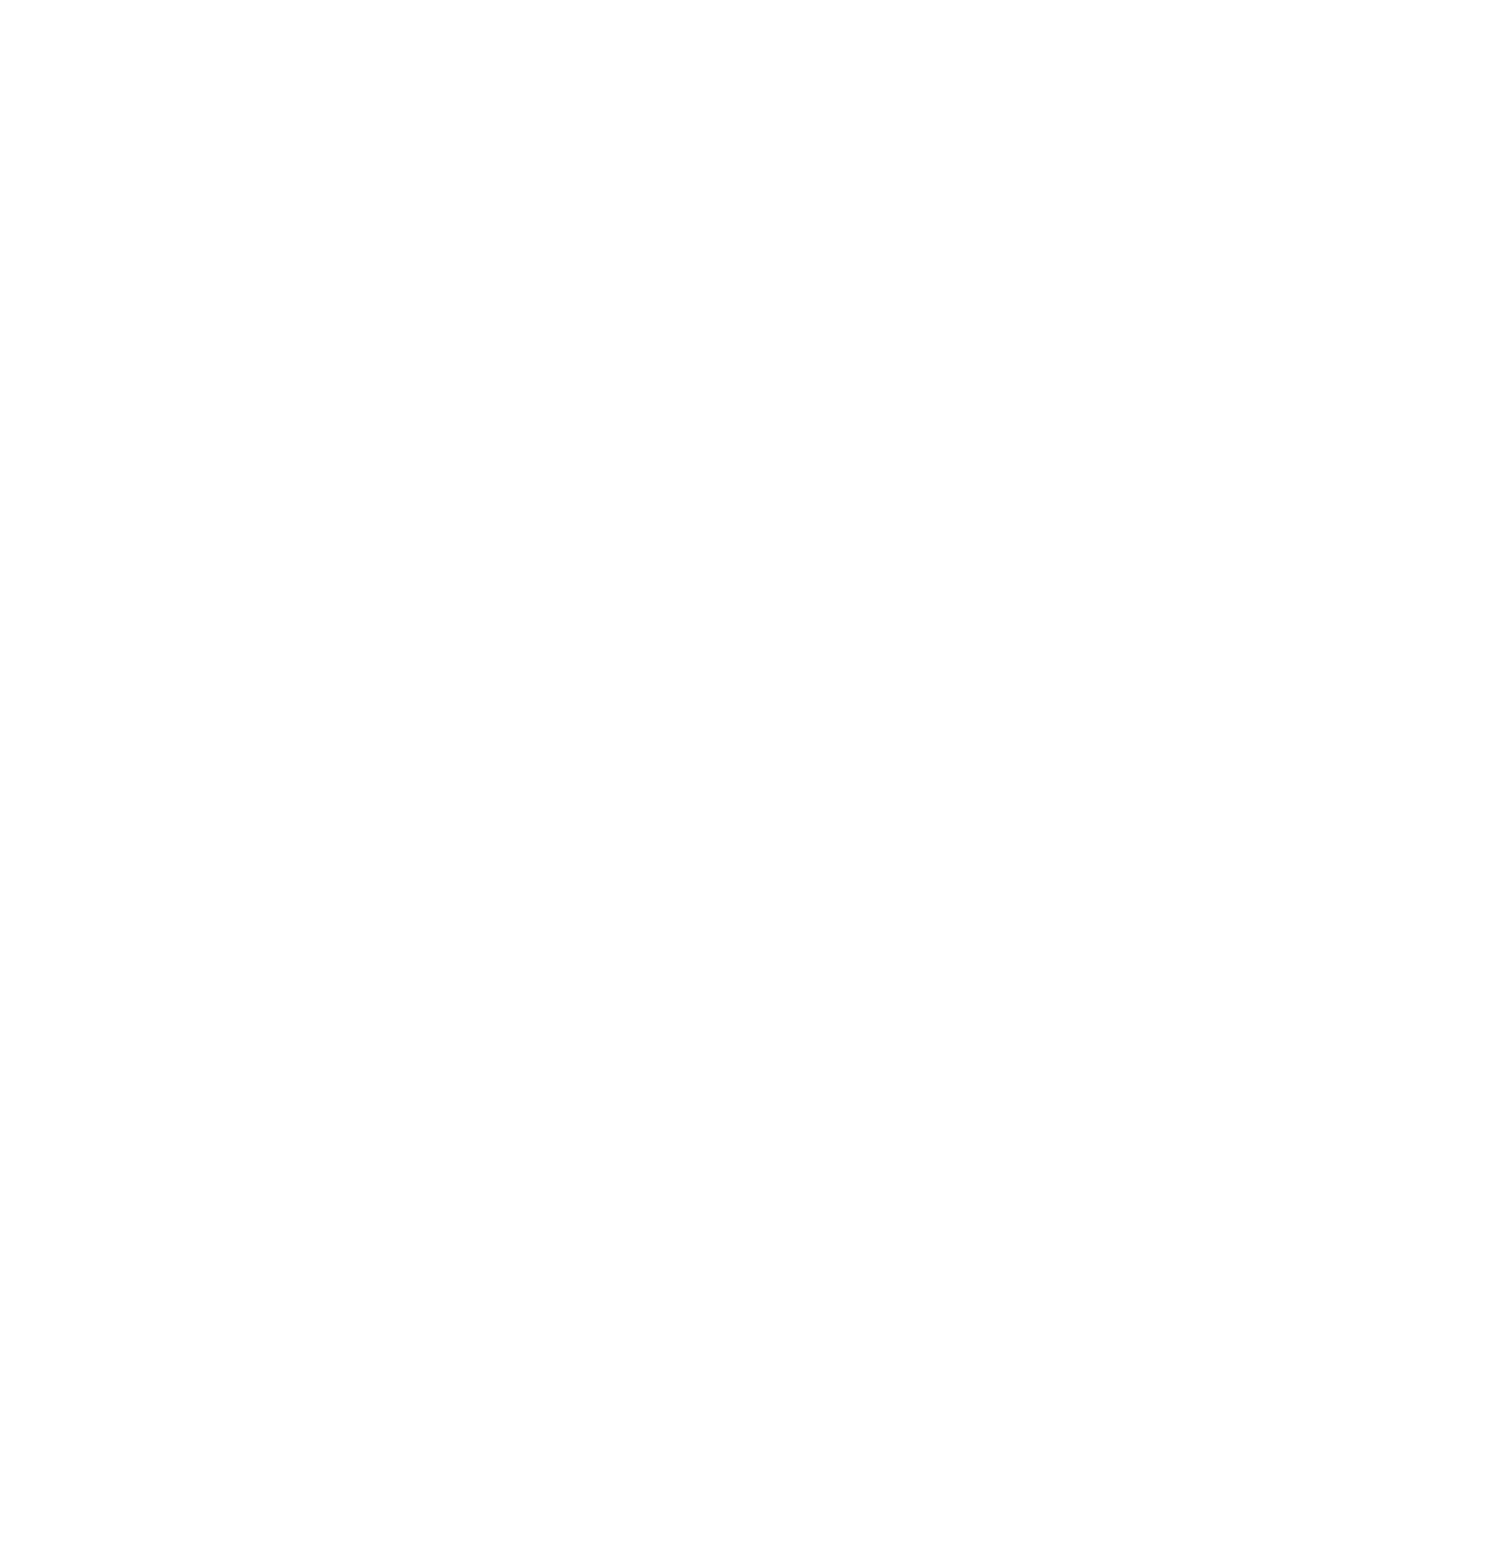 Unilever Indonesia logo in transparent PNG and vectorized SVG formats